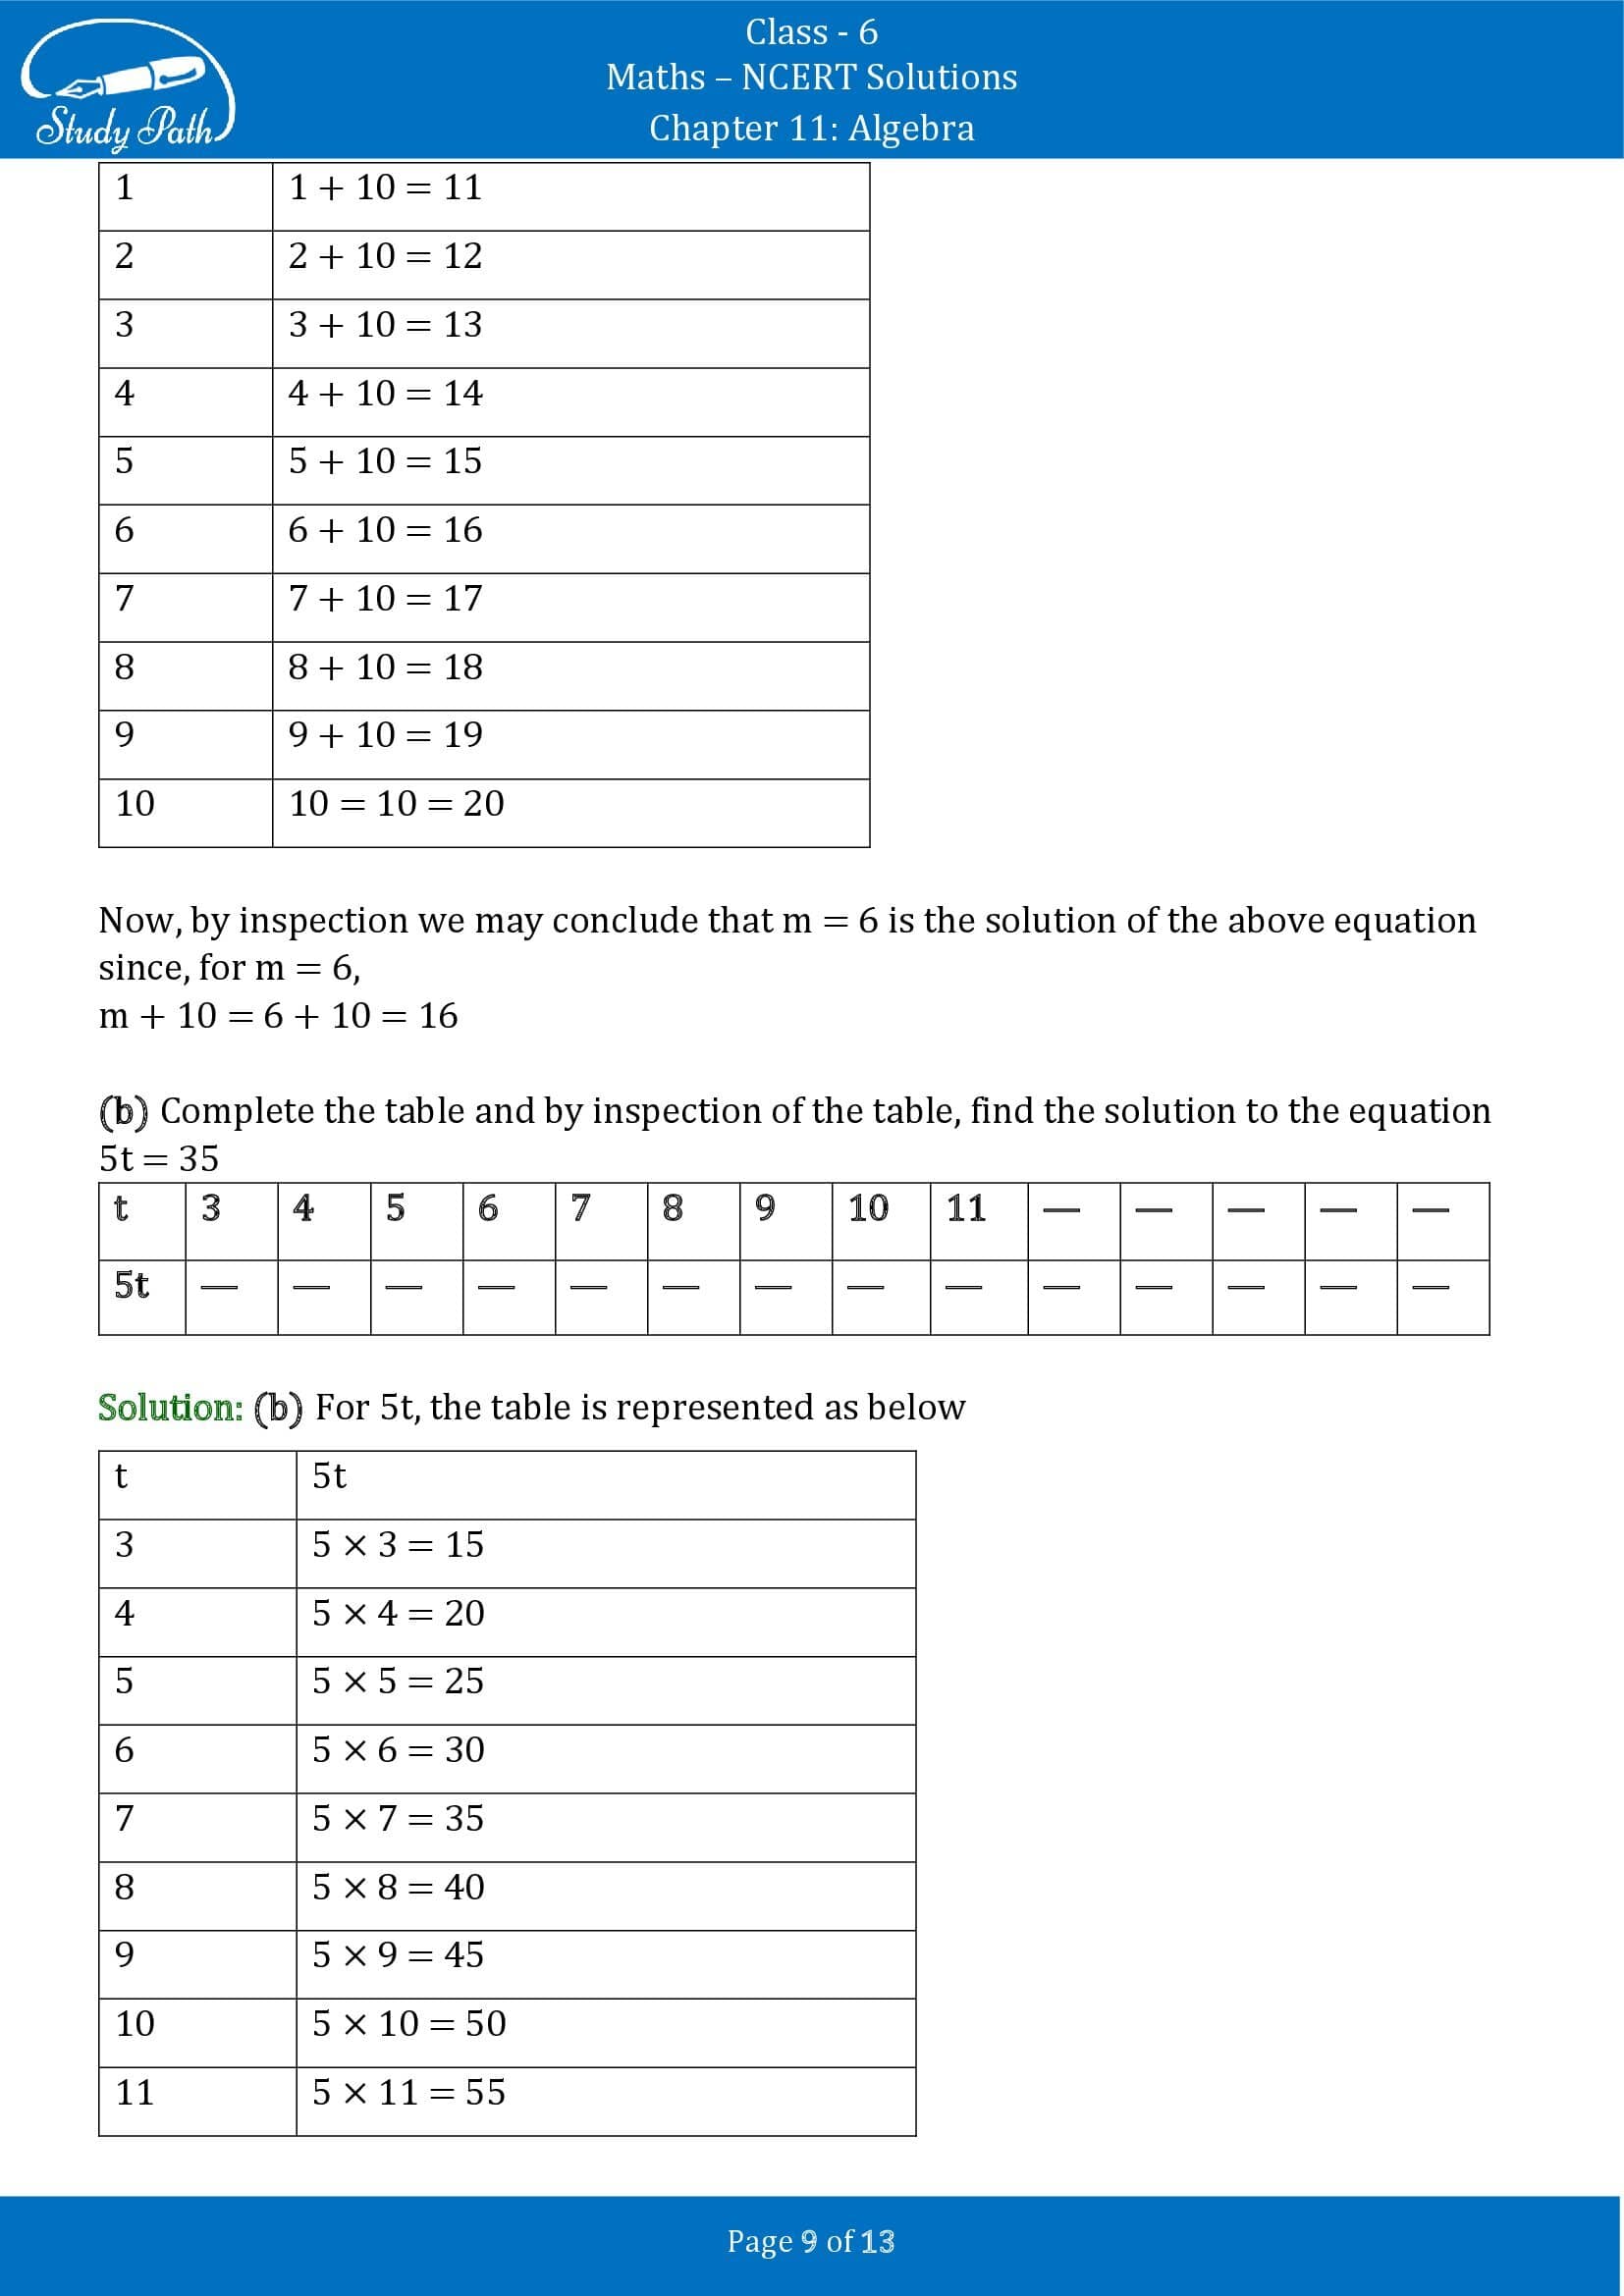 NCERT Solutions for Class 6 Maths Chapter 11 Algebra Exercise 11.5 00009